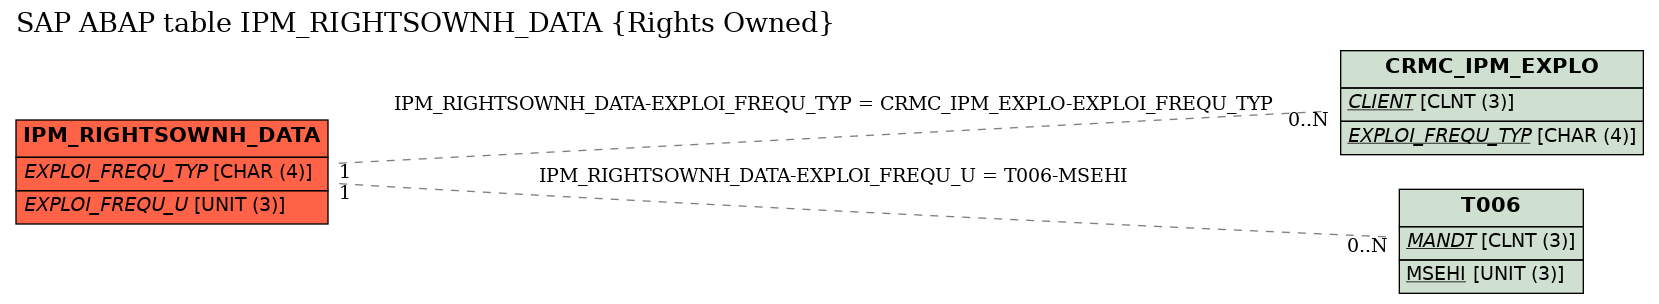 E-R Diagram for table IPM_RIGHTSOWNH_DATA (Rights Owned)